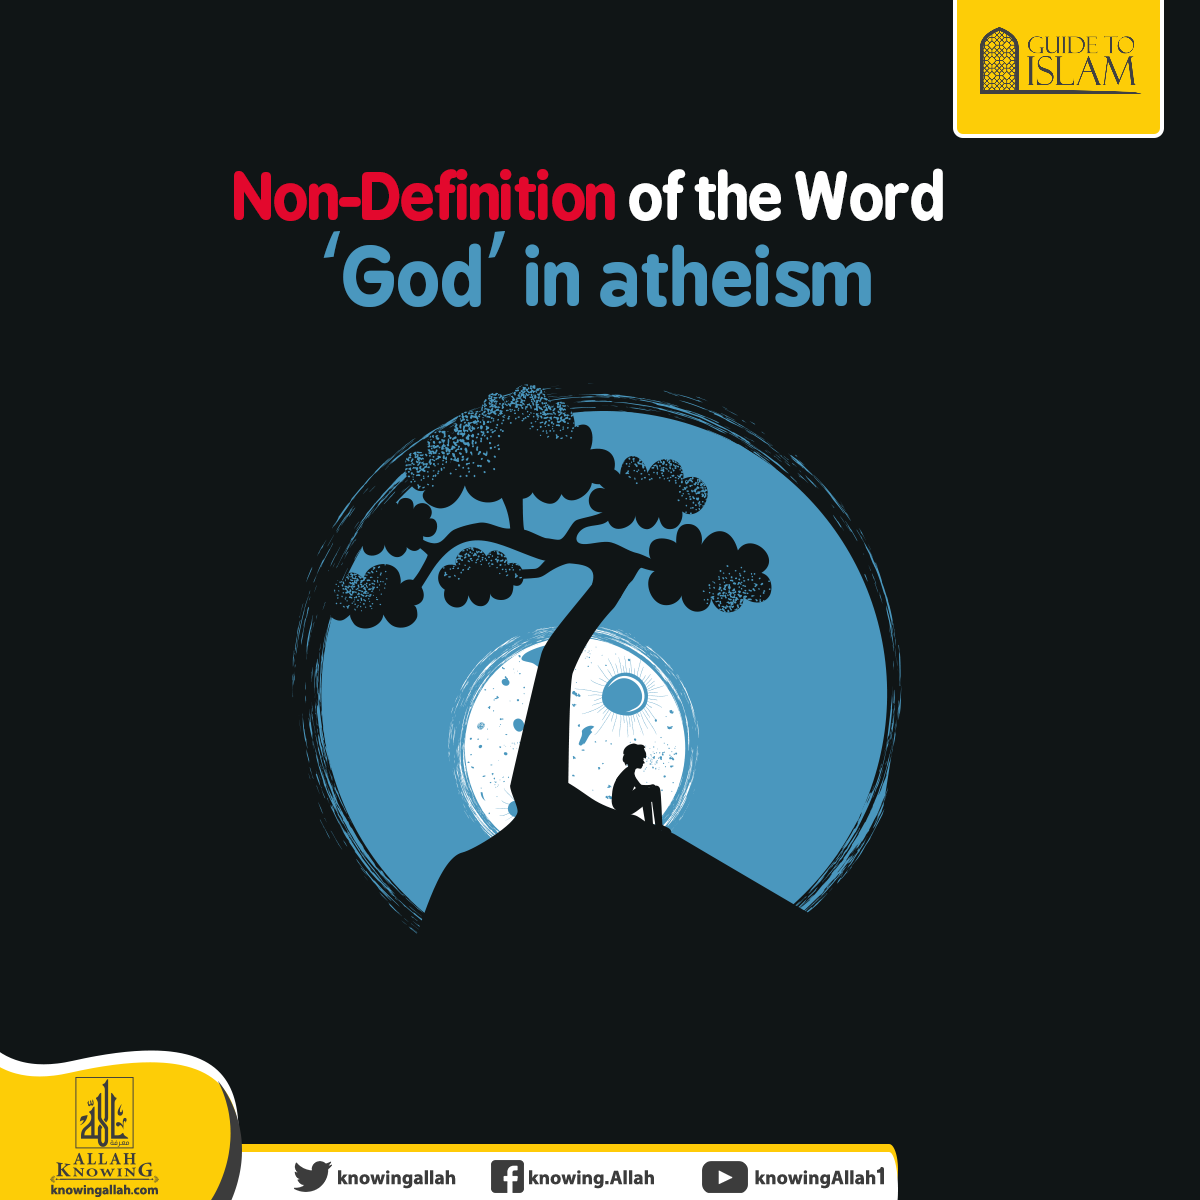 Non-Definition of the Word ‘God’ in atheism